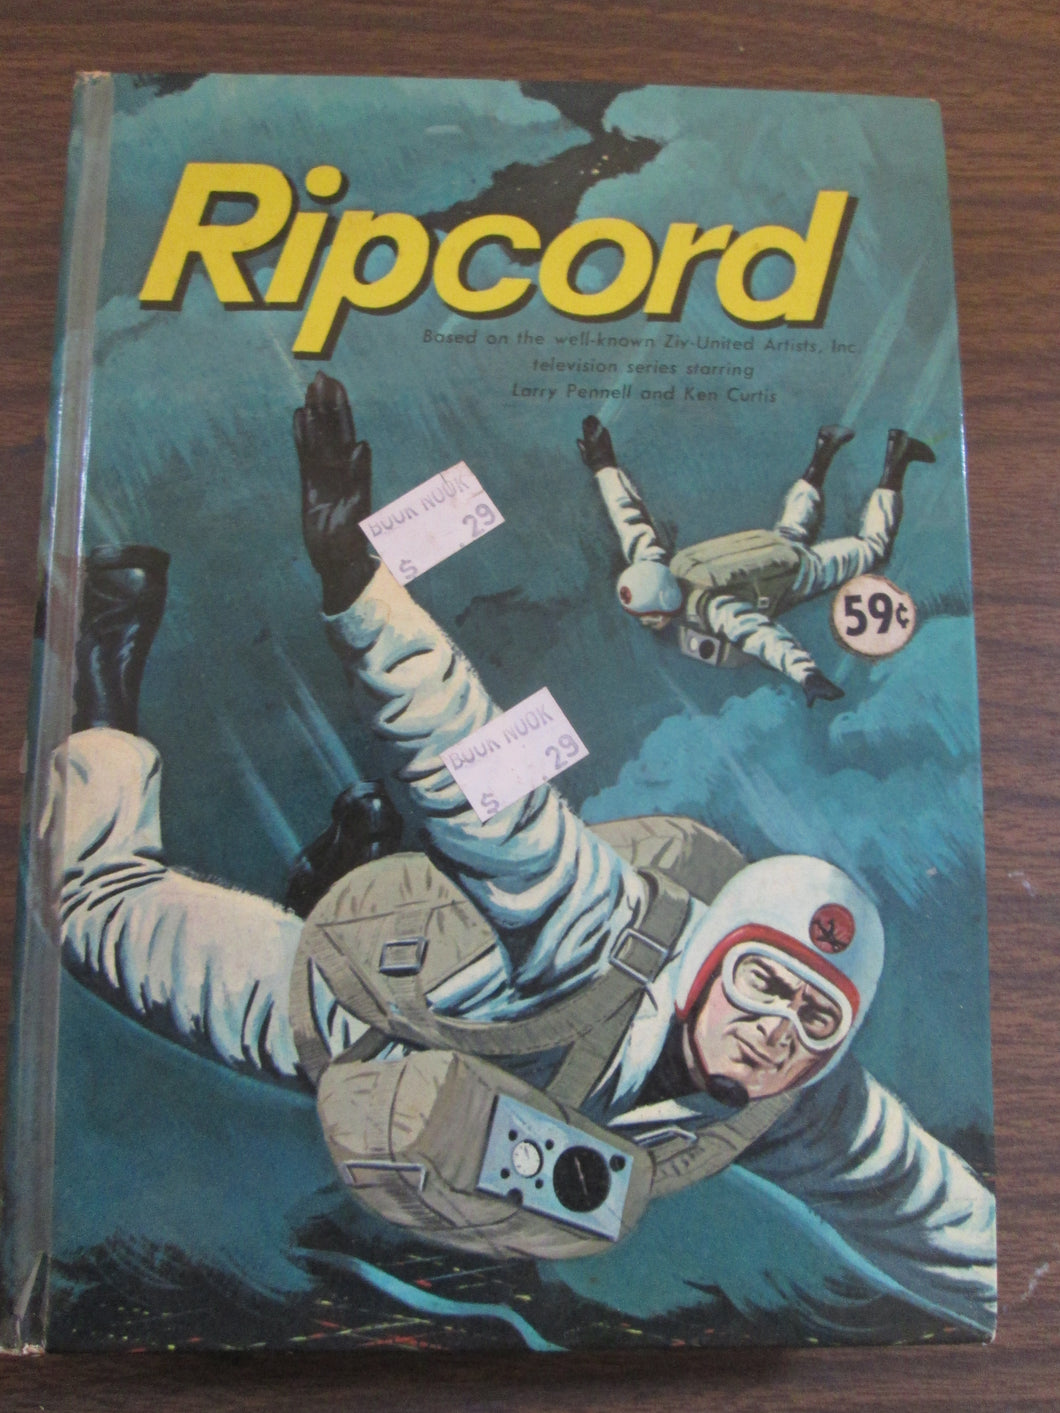 Ripcord TV Adventure Book by D. S. Halacy HC 1962